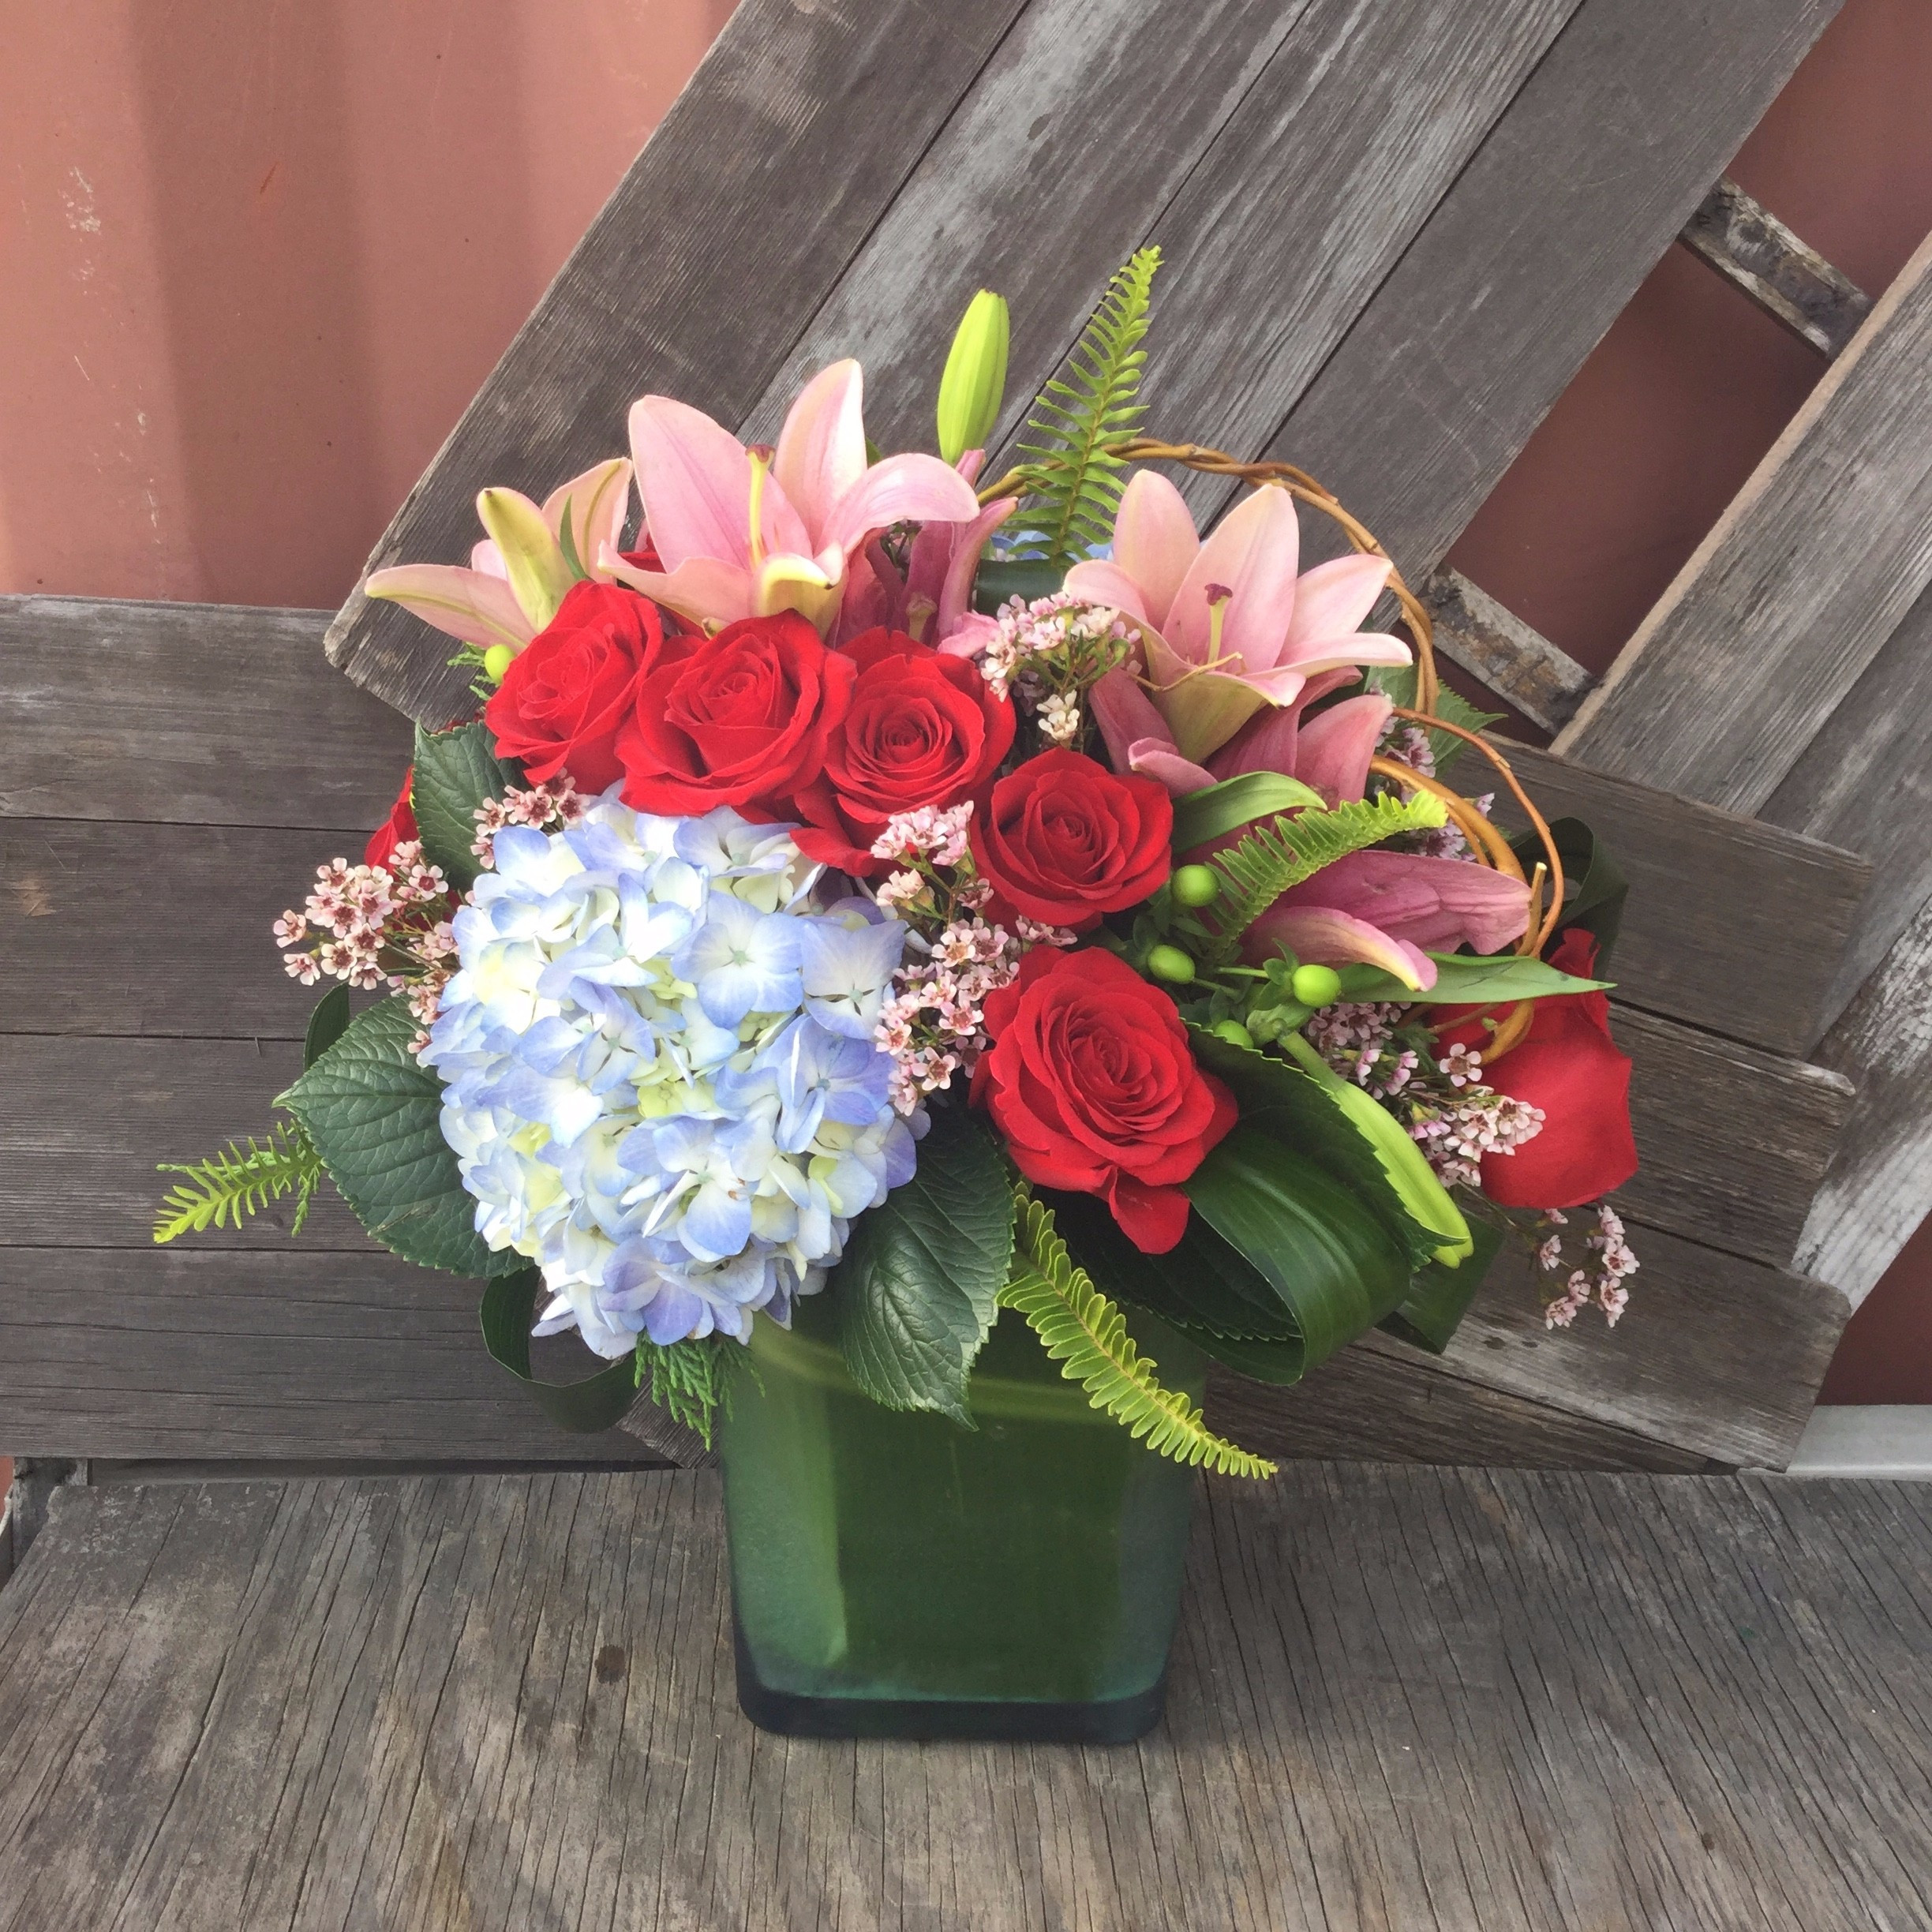 18 attractive Flower Delivery No Vase 2024 free download flower delivery no vase of new orleans florist flower delivery by monas accents with extravagant blooms